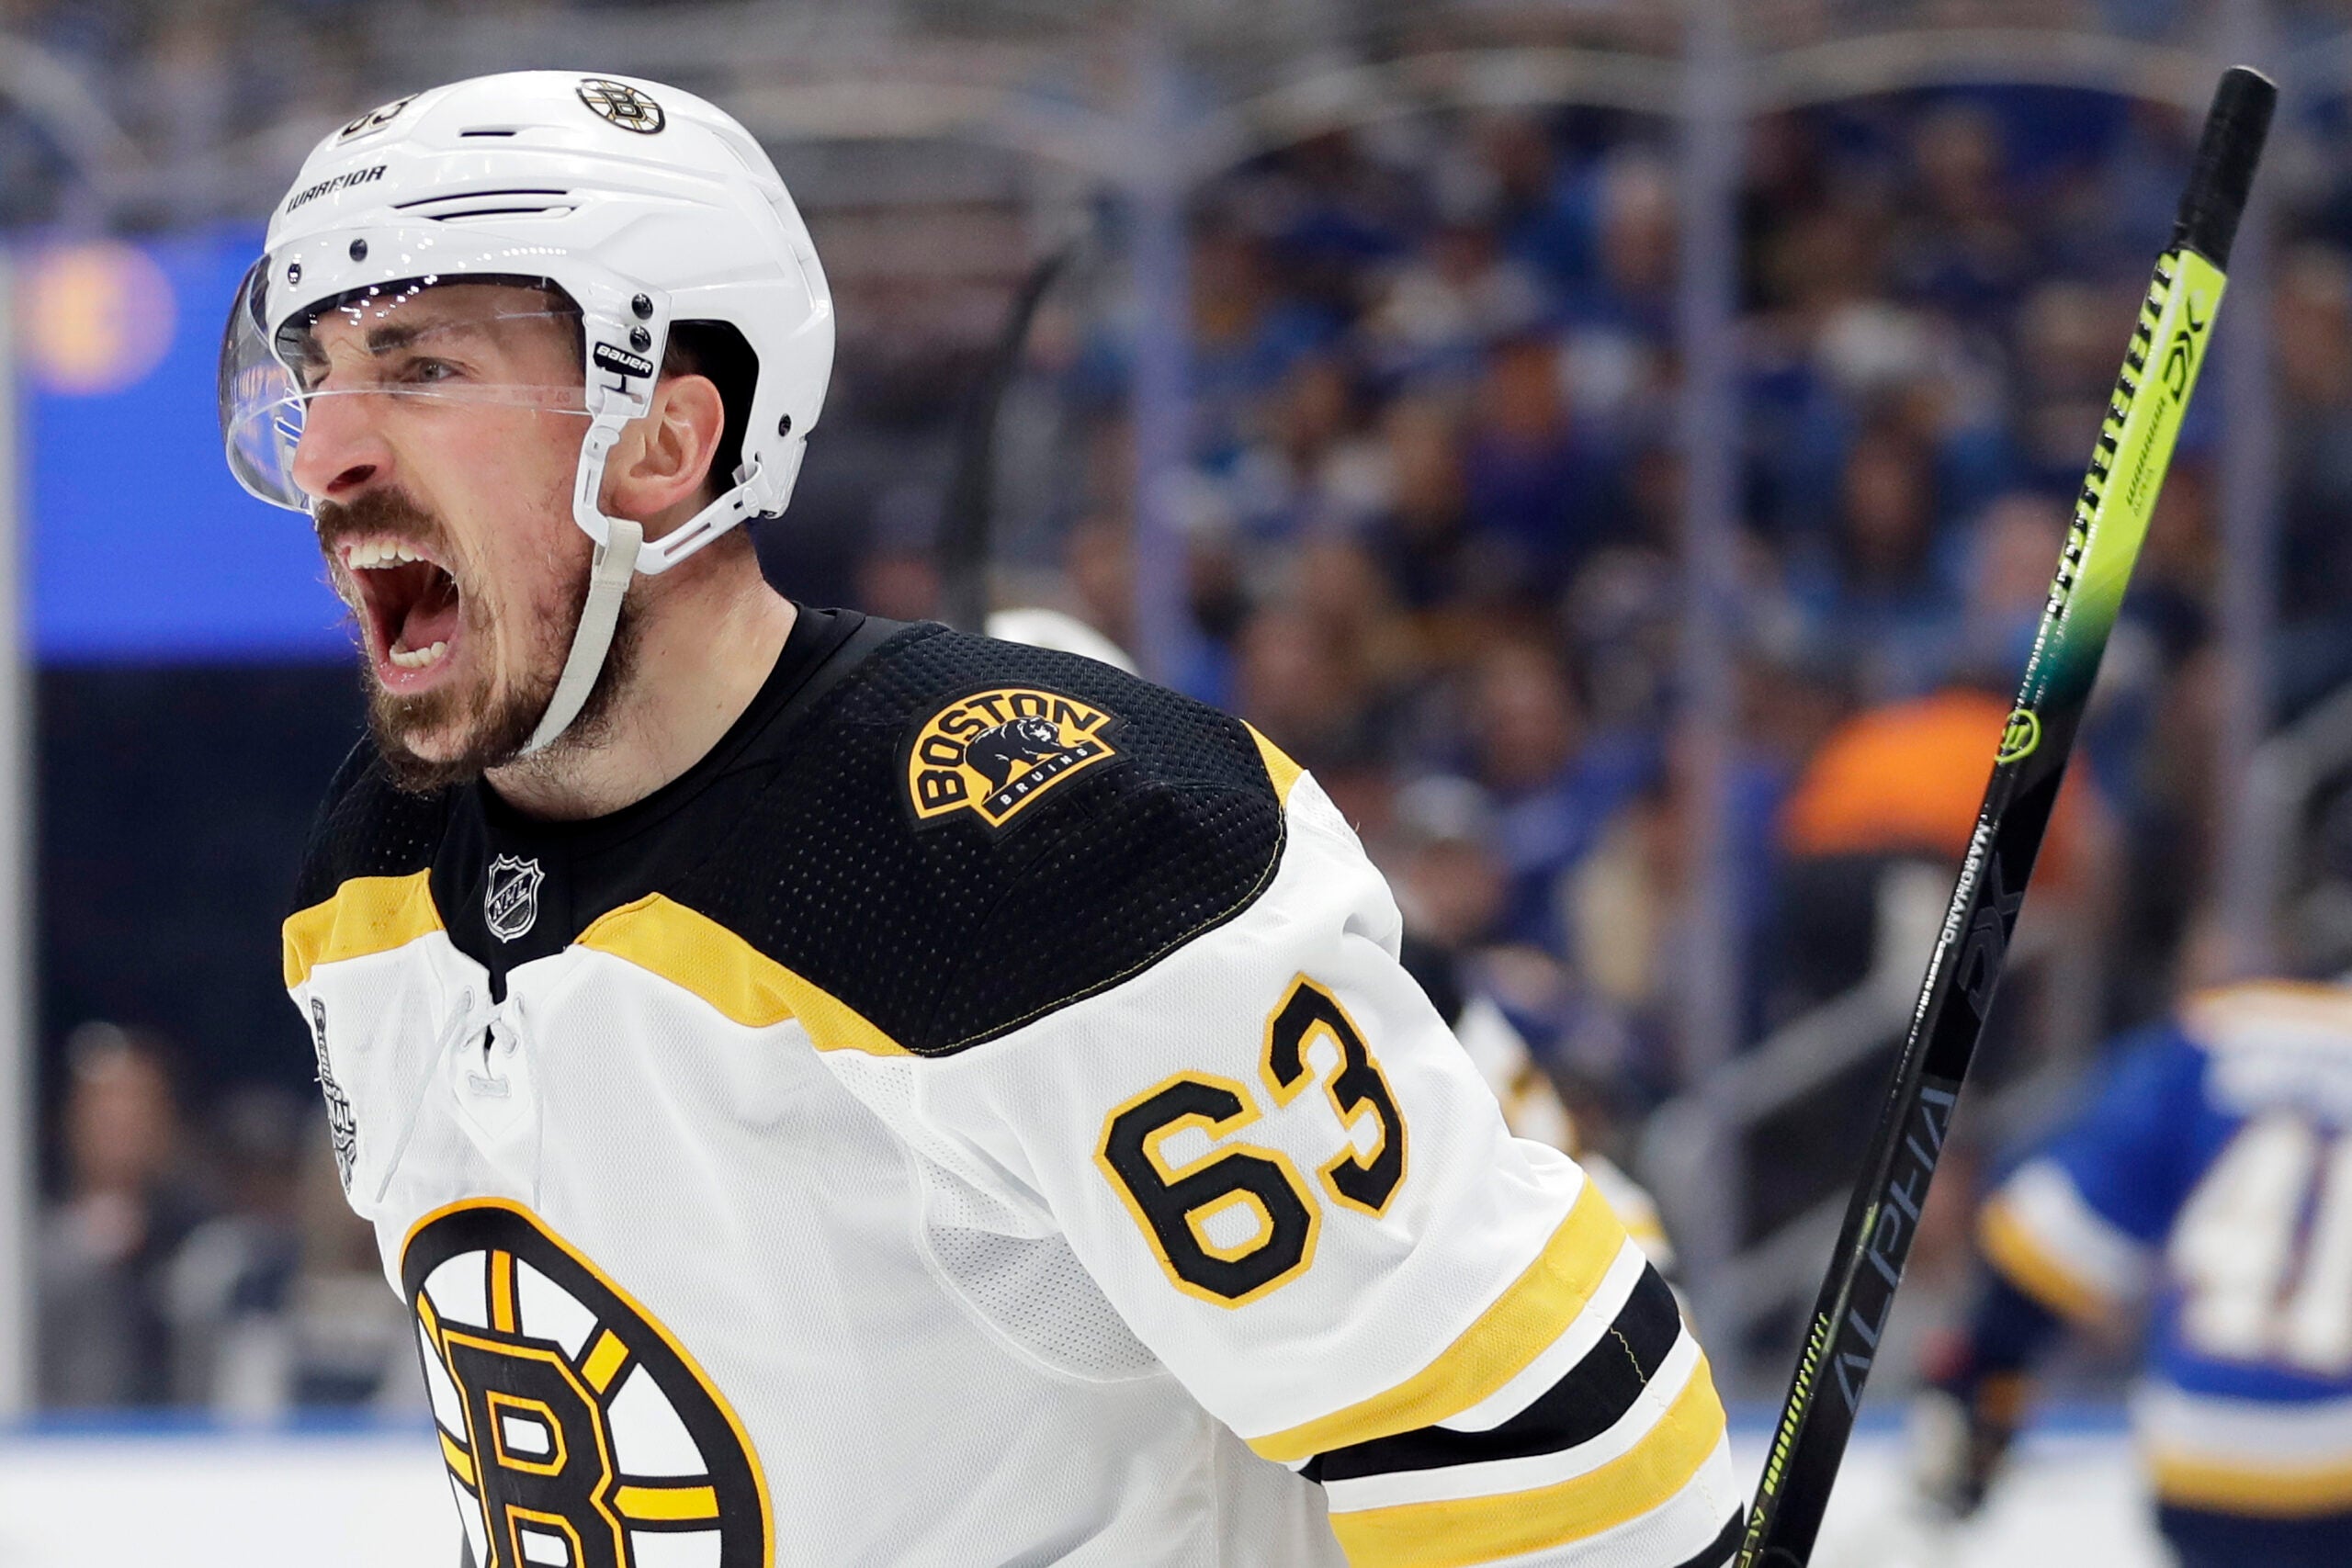 Boston Bruins: Can Brad Marchand hit 100 points this season?